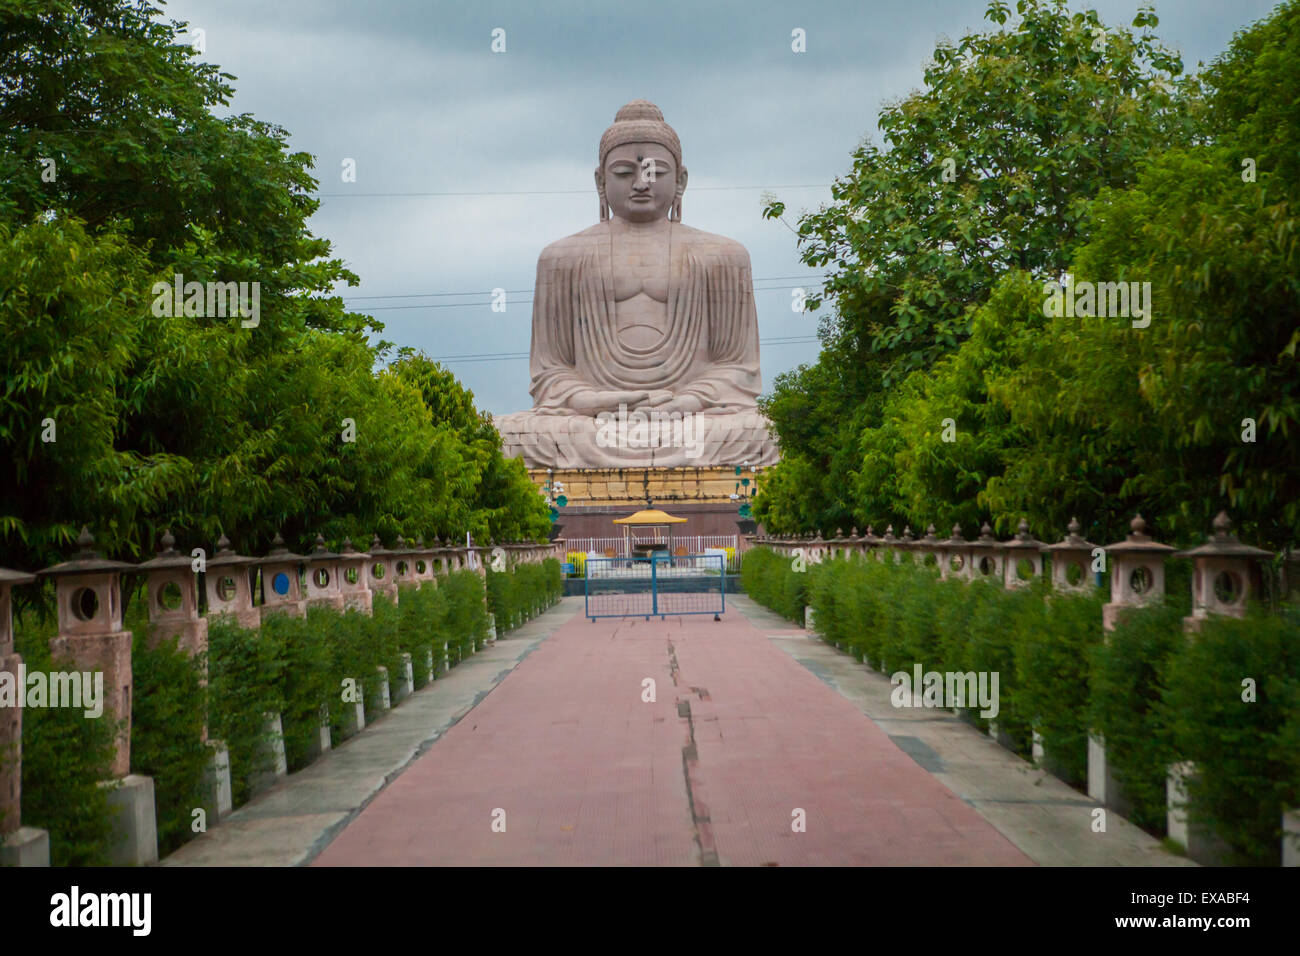 A 64-feet-high Great Buddha statue in a meditation pose, made by artist V. Ganapati Sthapati from 1982 to 1989, located in Bodh Gaya, Bihar, India. Stock Photo